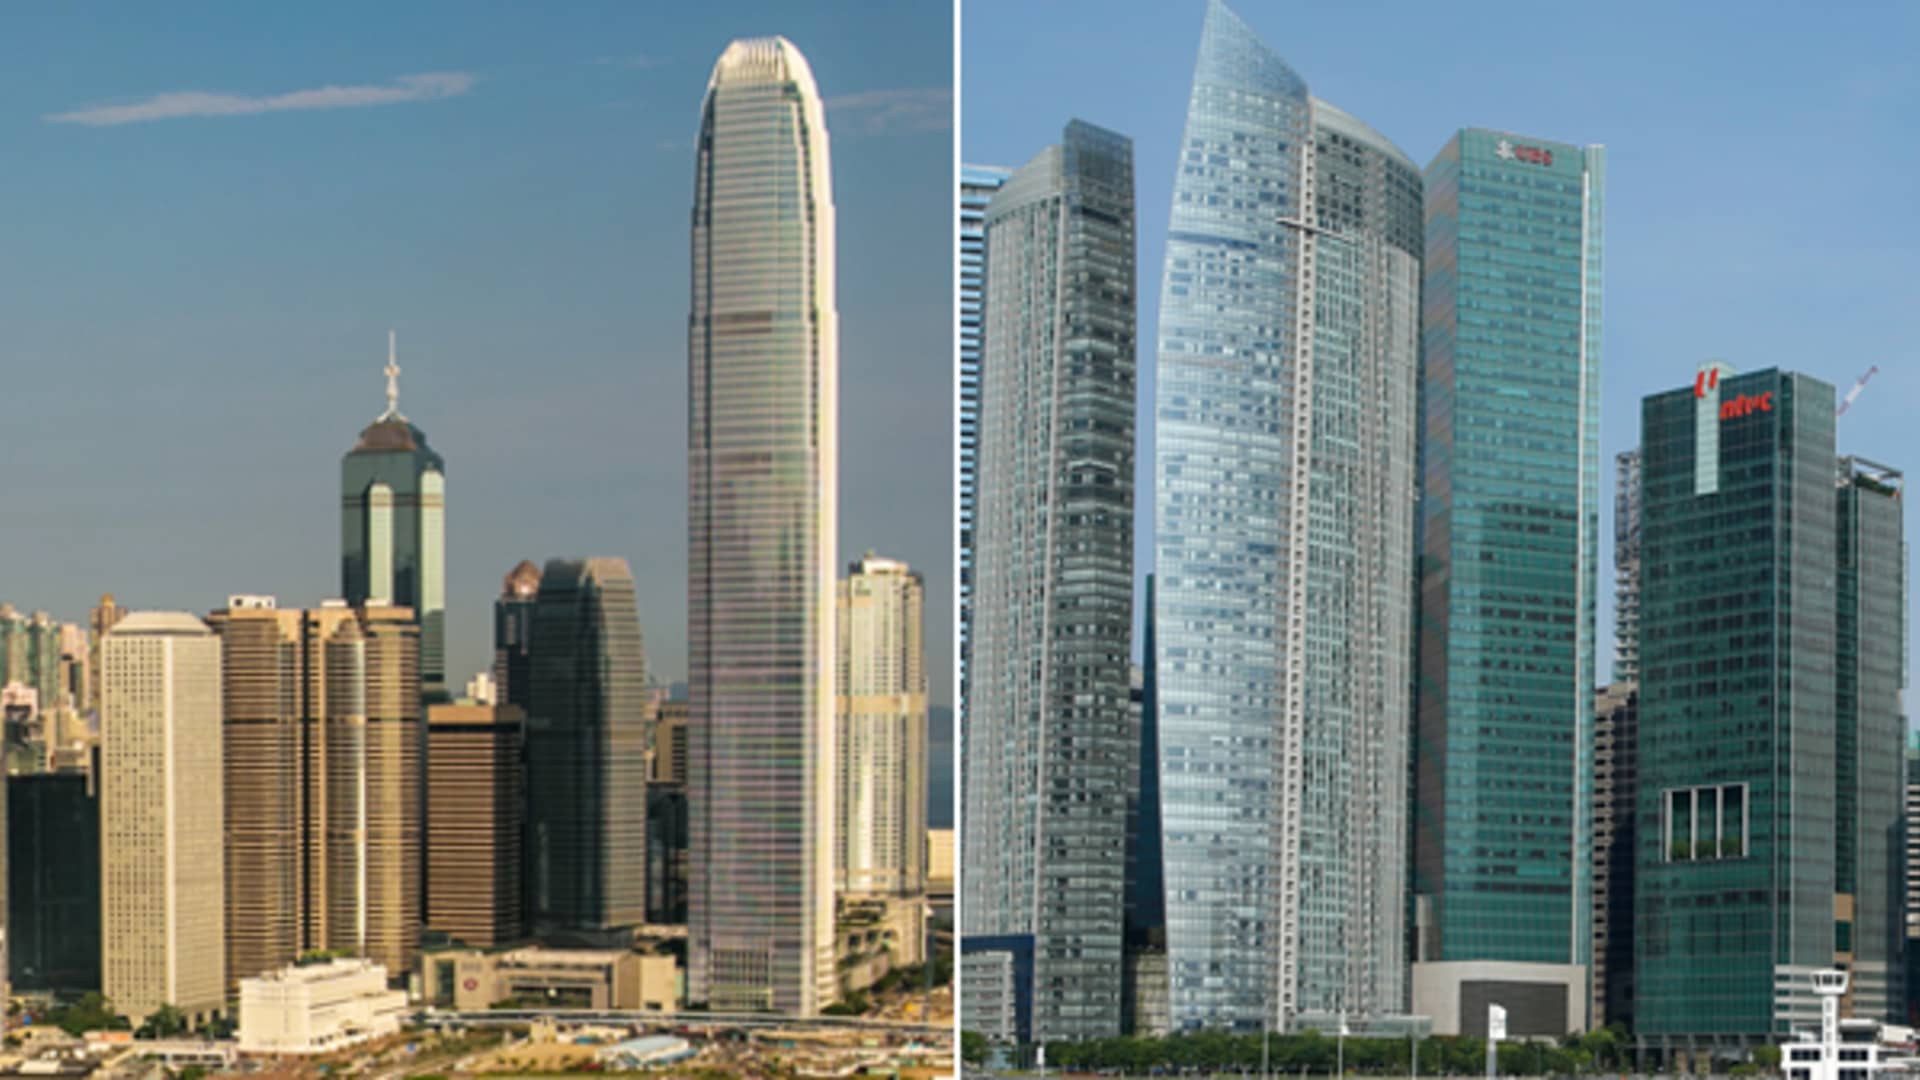 Is the SPAC boom over? Deals in Singapore and Hong Kong appear to be fizzling out